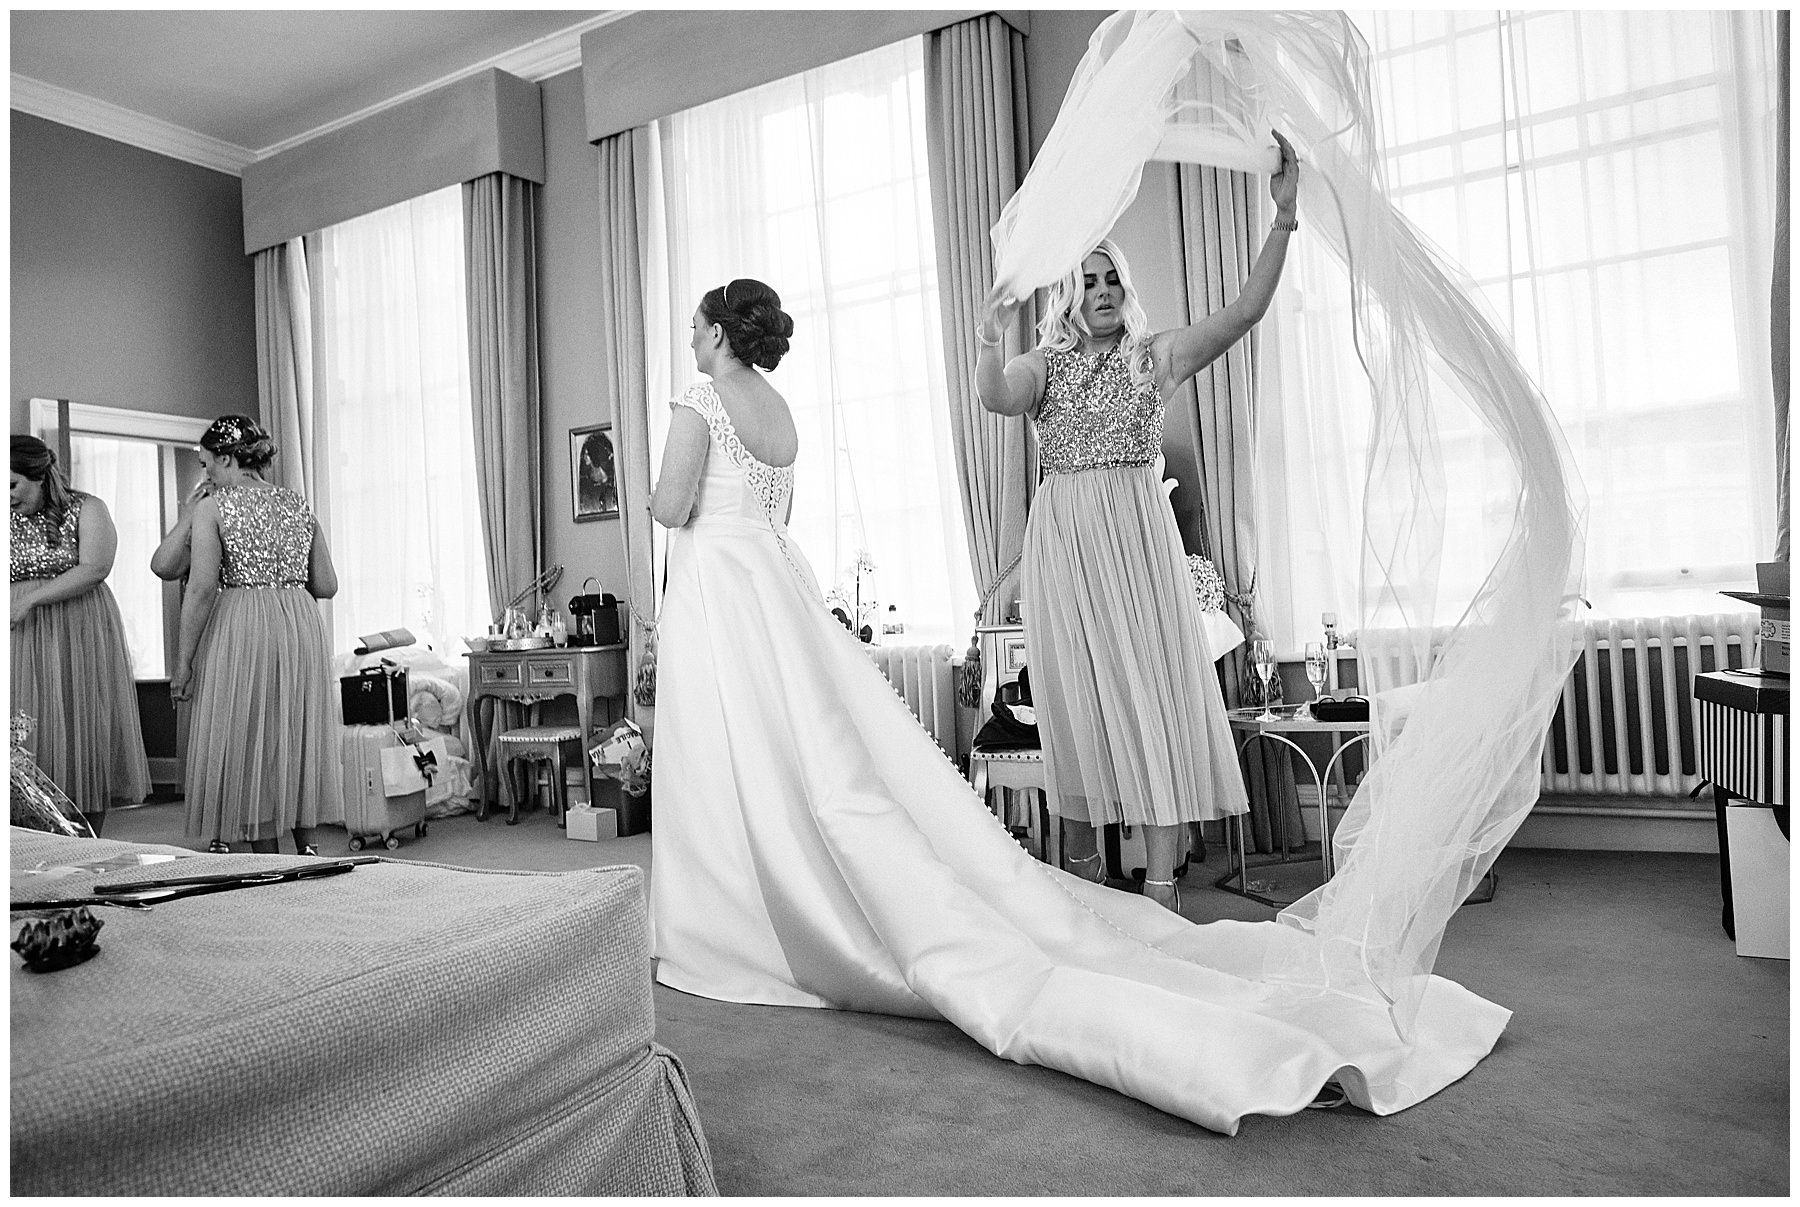 Photographs showing the beautiful moment our bride dresses in her dress from Muse Bridal at Hawkstone Hall in Shrewsbury by Documentary Wedding Photographer Stuart James